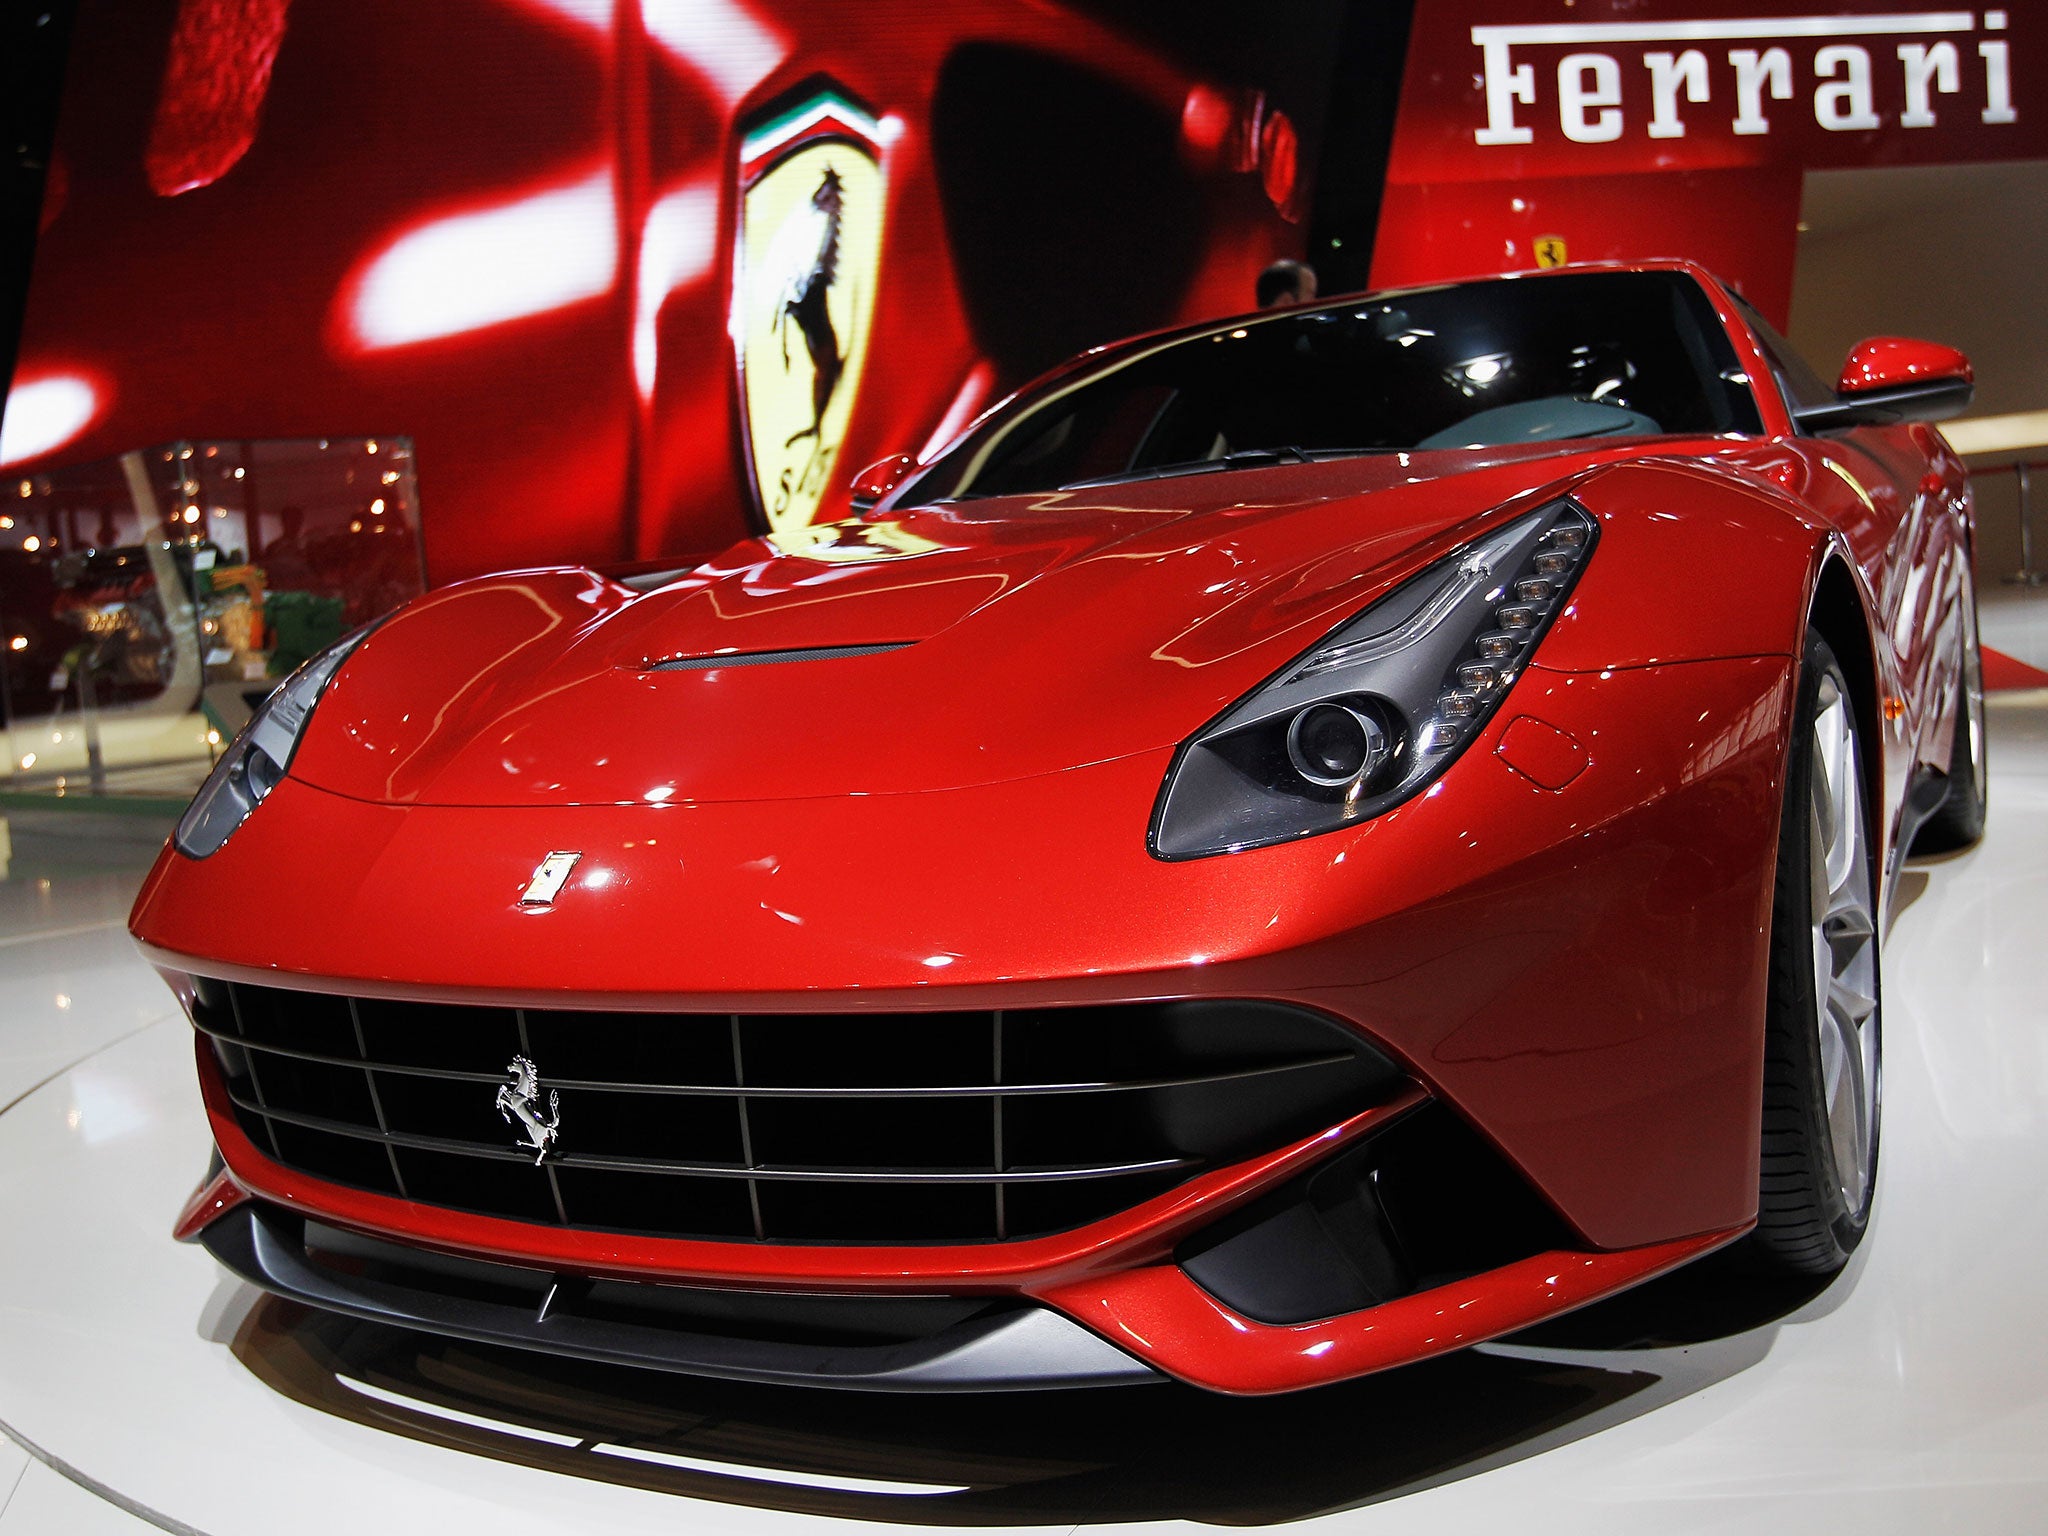 The Ferrari F12 was among the models recalled